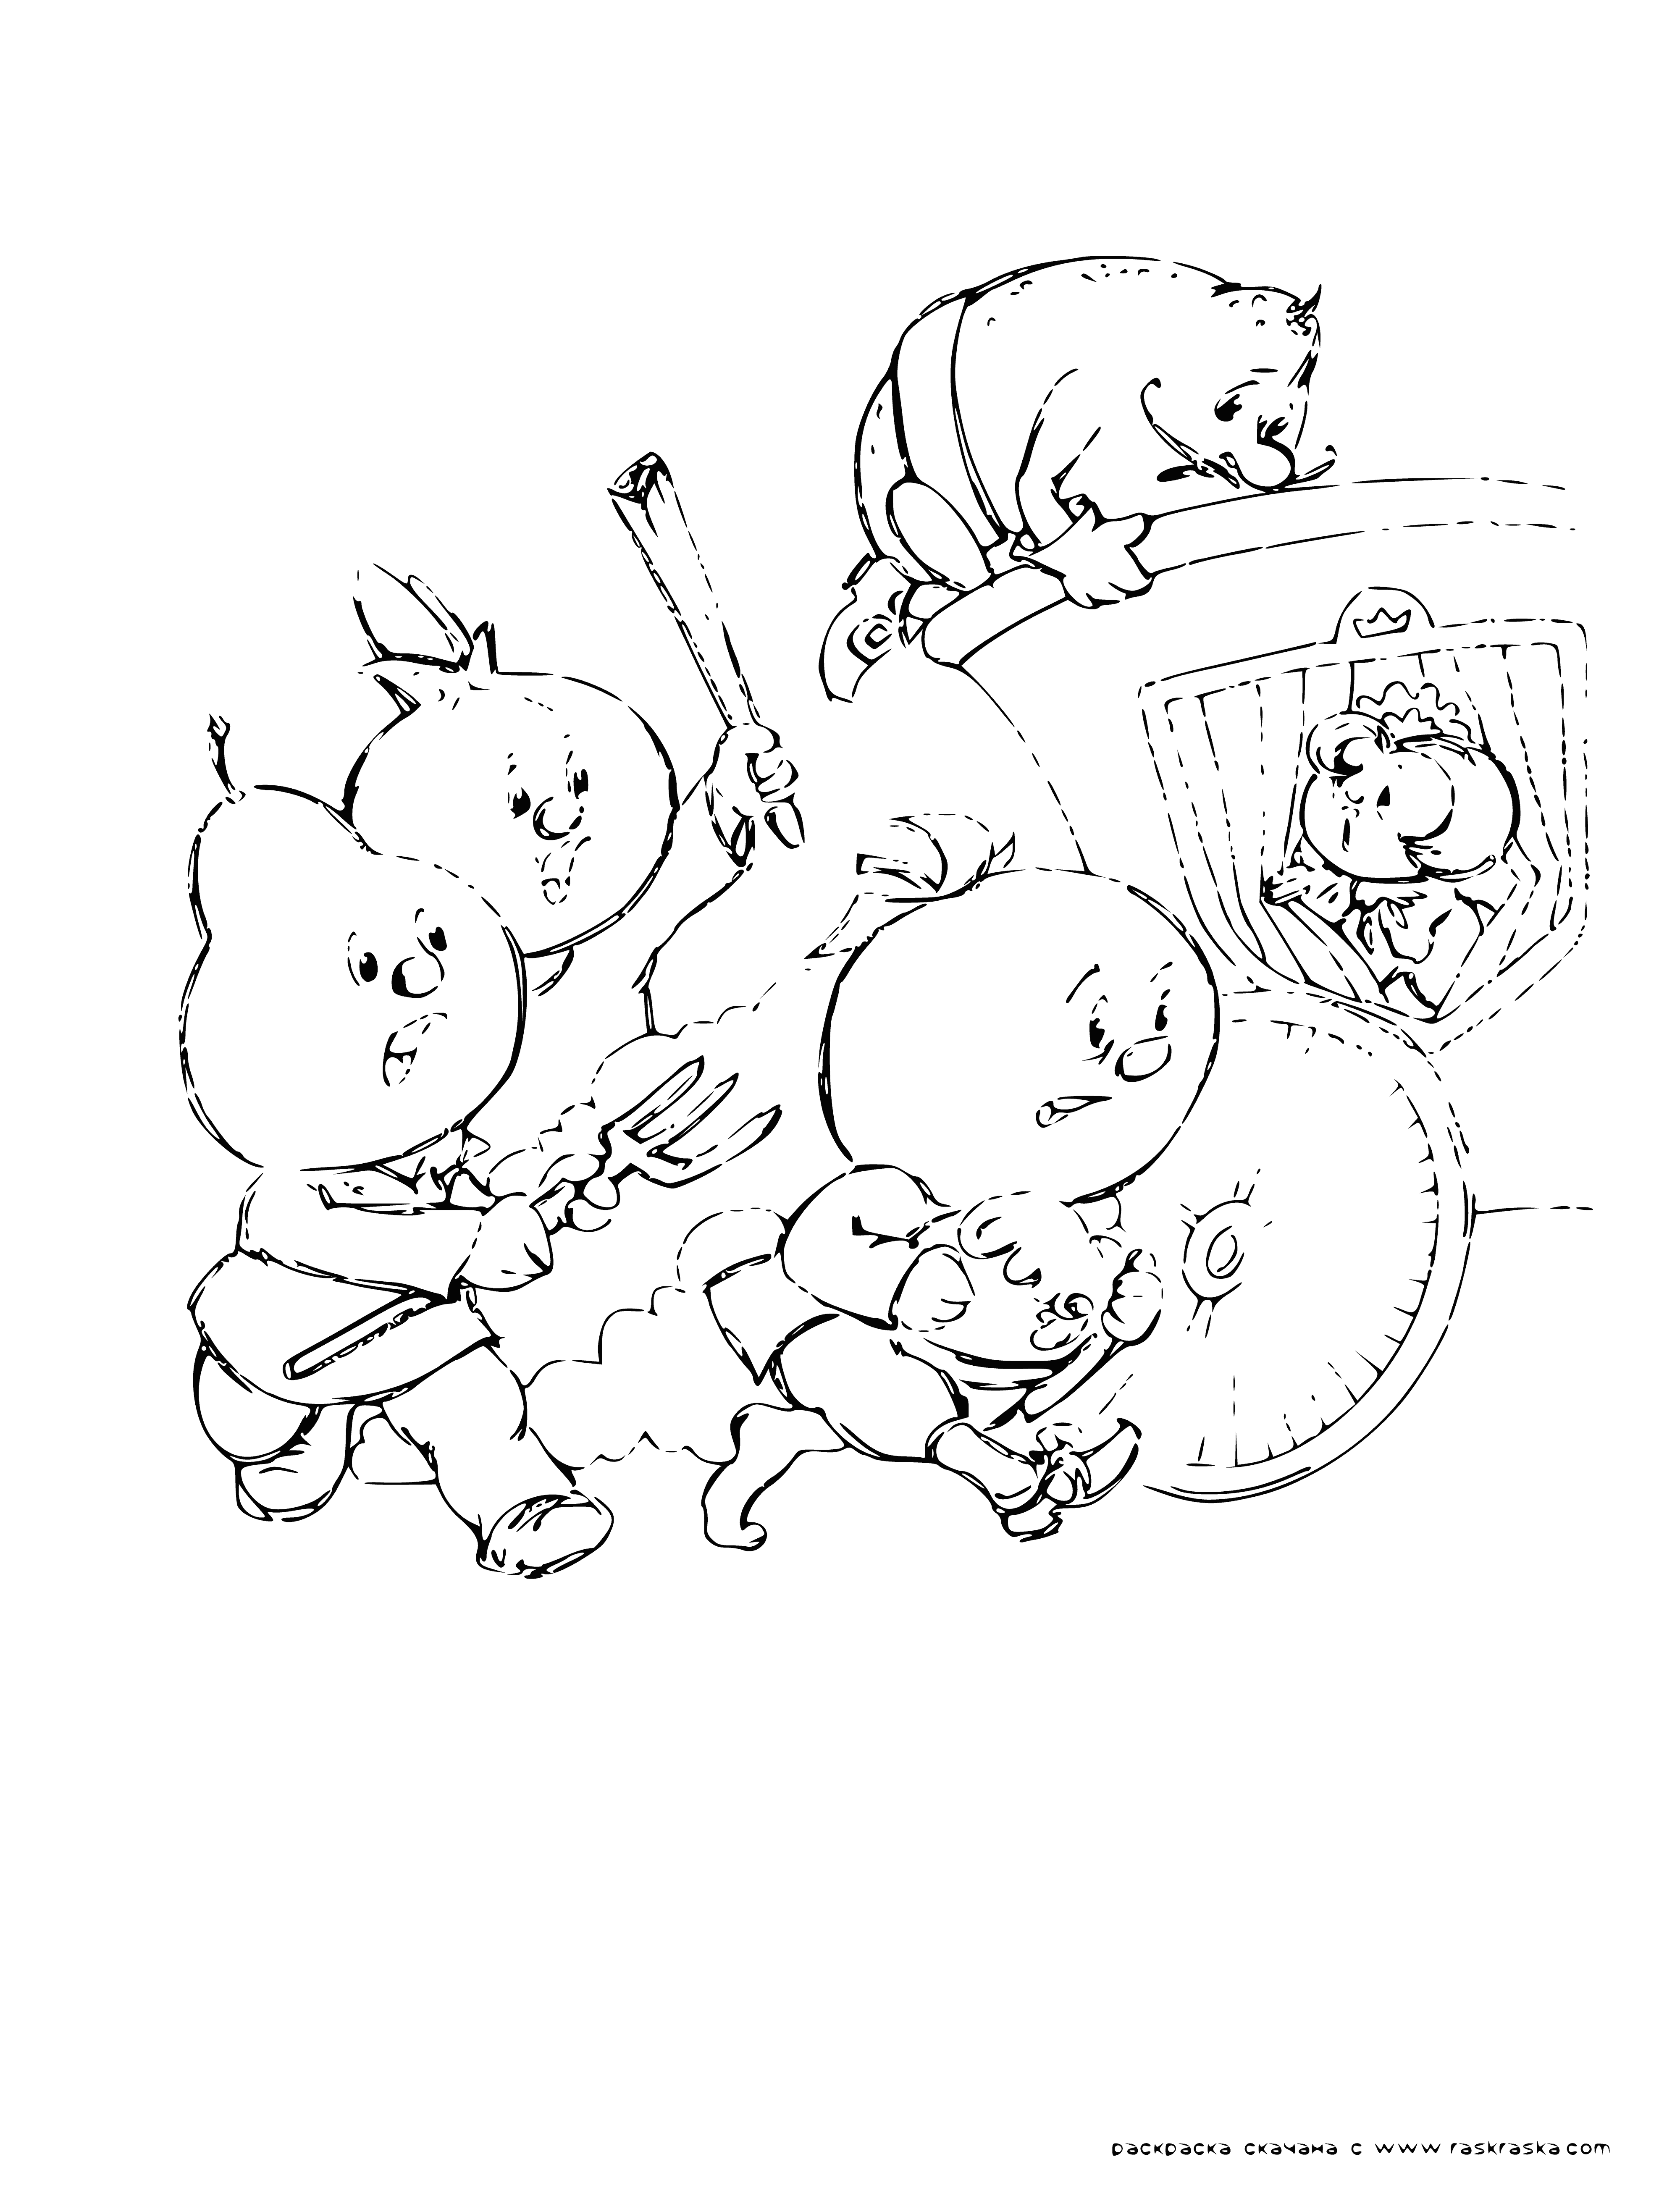 Rise of vegetables coloring page